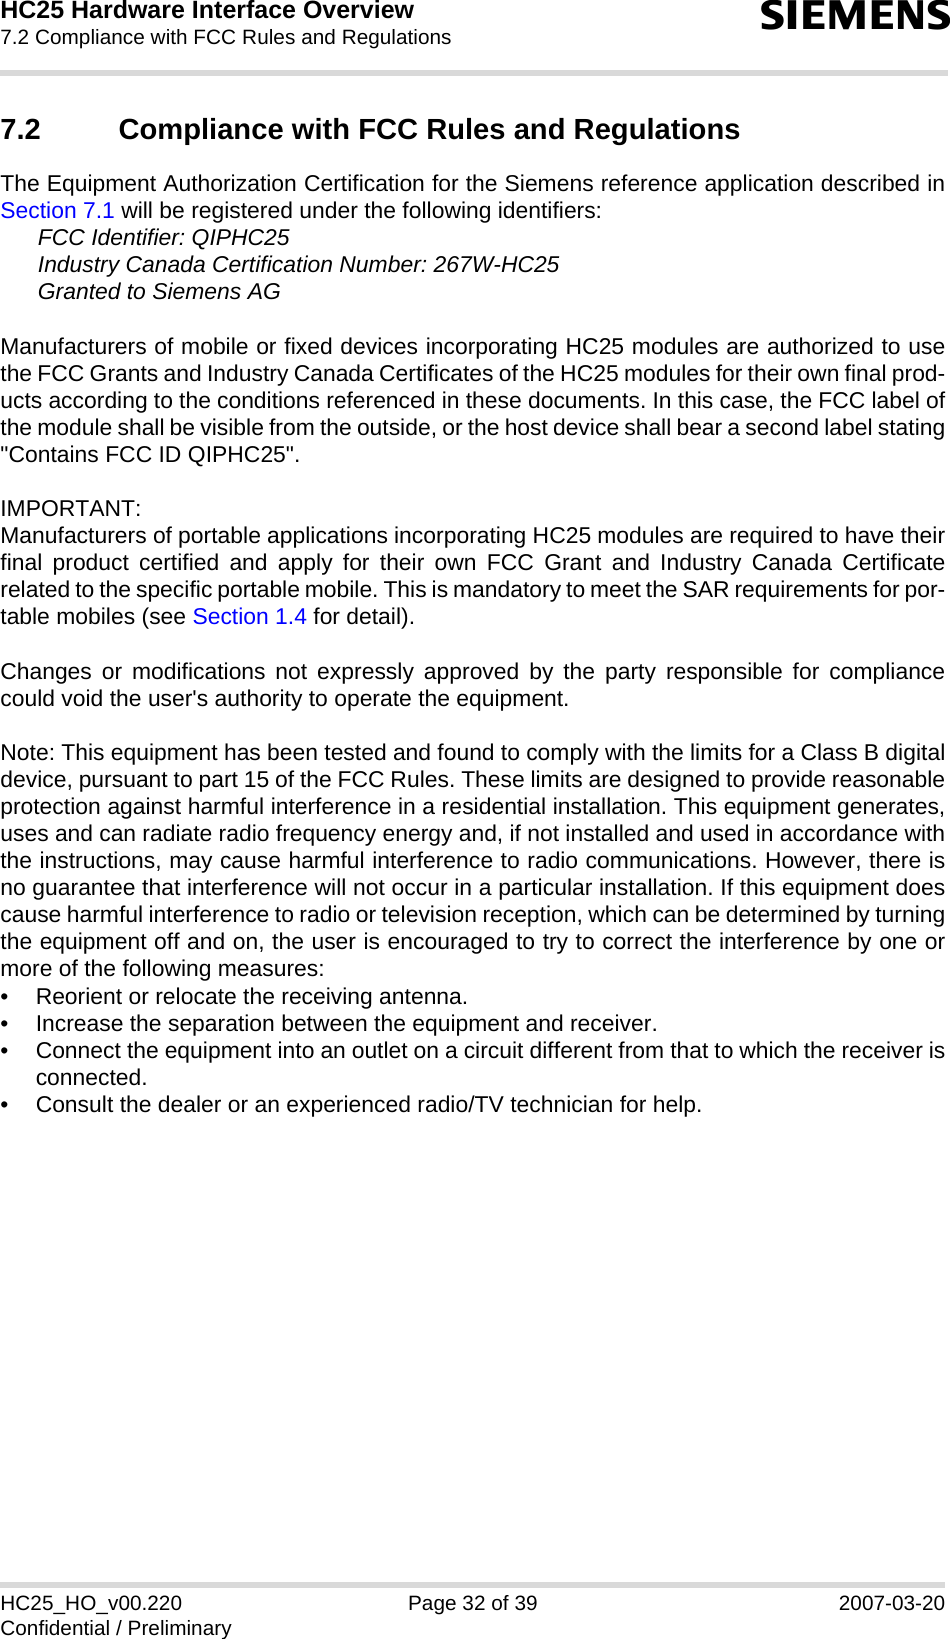 HC25 Hardware Interface Overview7.2 Compliance with FCC Rules and Regulations32sHC25_HO_v00.220 Page 32 of 39 2007-03-20Confidential / Preliminary7.2 Compliance with FCC Rules and Regulations The Equipment Authorization Certification for the Siemens reference application described inSection 7.1 will be registered under the following identifiers:FCC Identifier: QIPHC25Industry Canada Certification Number: 267W-HC25Granted to Siemens AGManufacturers of mobile or fixed devices incorporating HC25 modules are authorized to usethe FCC Grants and Industry Canada Certificates of the HC25 modules for their own final prod-ucts according to the conditions referenced in these documents. In this case, the FCC label ofthe module shall be visible from the outside, or the host device shall bear a second label stating&quot;Contains FCC ID QIPHC25&quot;.IMPORTANT:Manufacturers of portable applications incorporating HC25 modules are required to have theirfinal product certified and apply for their own FCC Grant and Industry Canada Certificaterelated to the specific portable mobile. This is mandatory to meet the SAR requirements for por-table mobiles (see Section 1.4 for detail).Changes or modifications not expressly approved by the party responsible for compliancecould void the user&apos;s authority to operate the equipment.Note: This equipment has been tested and found to comply with the limits for a Class B digitaldevice, pursuant to part 15 of the FCC Rules. These limits are designed to provide reasonableprotection against harmful interference in a residential installation. This equipment generates,uses and can radiate radio frequency energy and, if not installed and used in accordance withthe instructions, may cause harmful interference to radio communications. However, there isno guarantee that interference will not occur in a particular installation. If this equipment doescause harmful interference to radio or television reception, which can be determined by turningthe equipment off and on, the user is encouraged to try to correct the interference by one ormore of the following measures: • Reorient or relocate the receiving antenna. • Increase the separation between the equipment and receiver. • Connect the equipment into an outlet on a circuit different from that to which the receiver isconnected. • Consult the dealer or an experienced radio/TV technician for help.